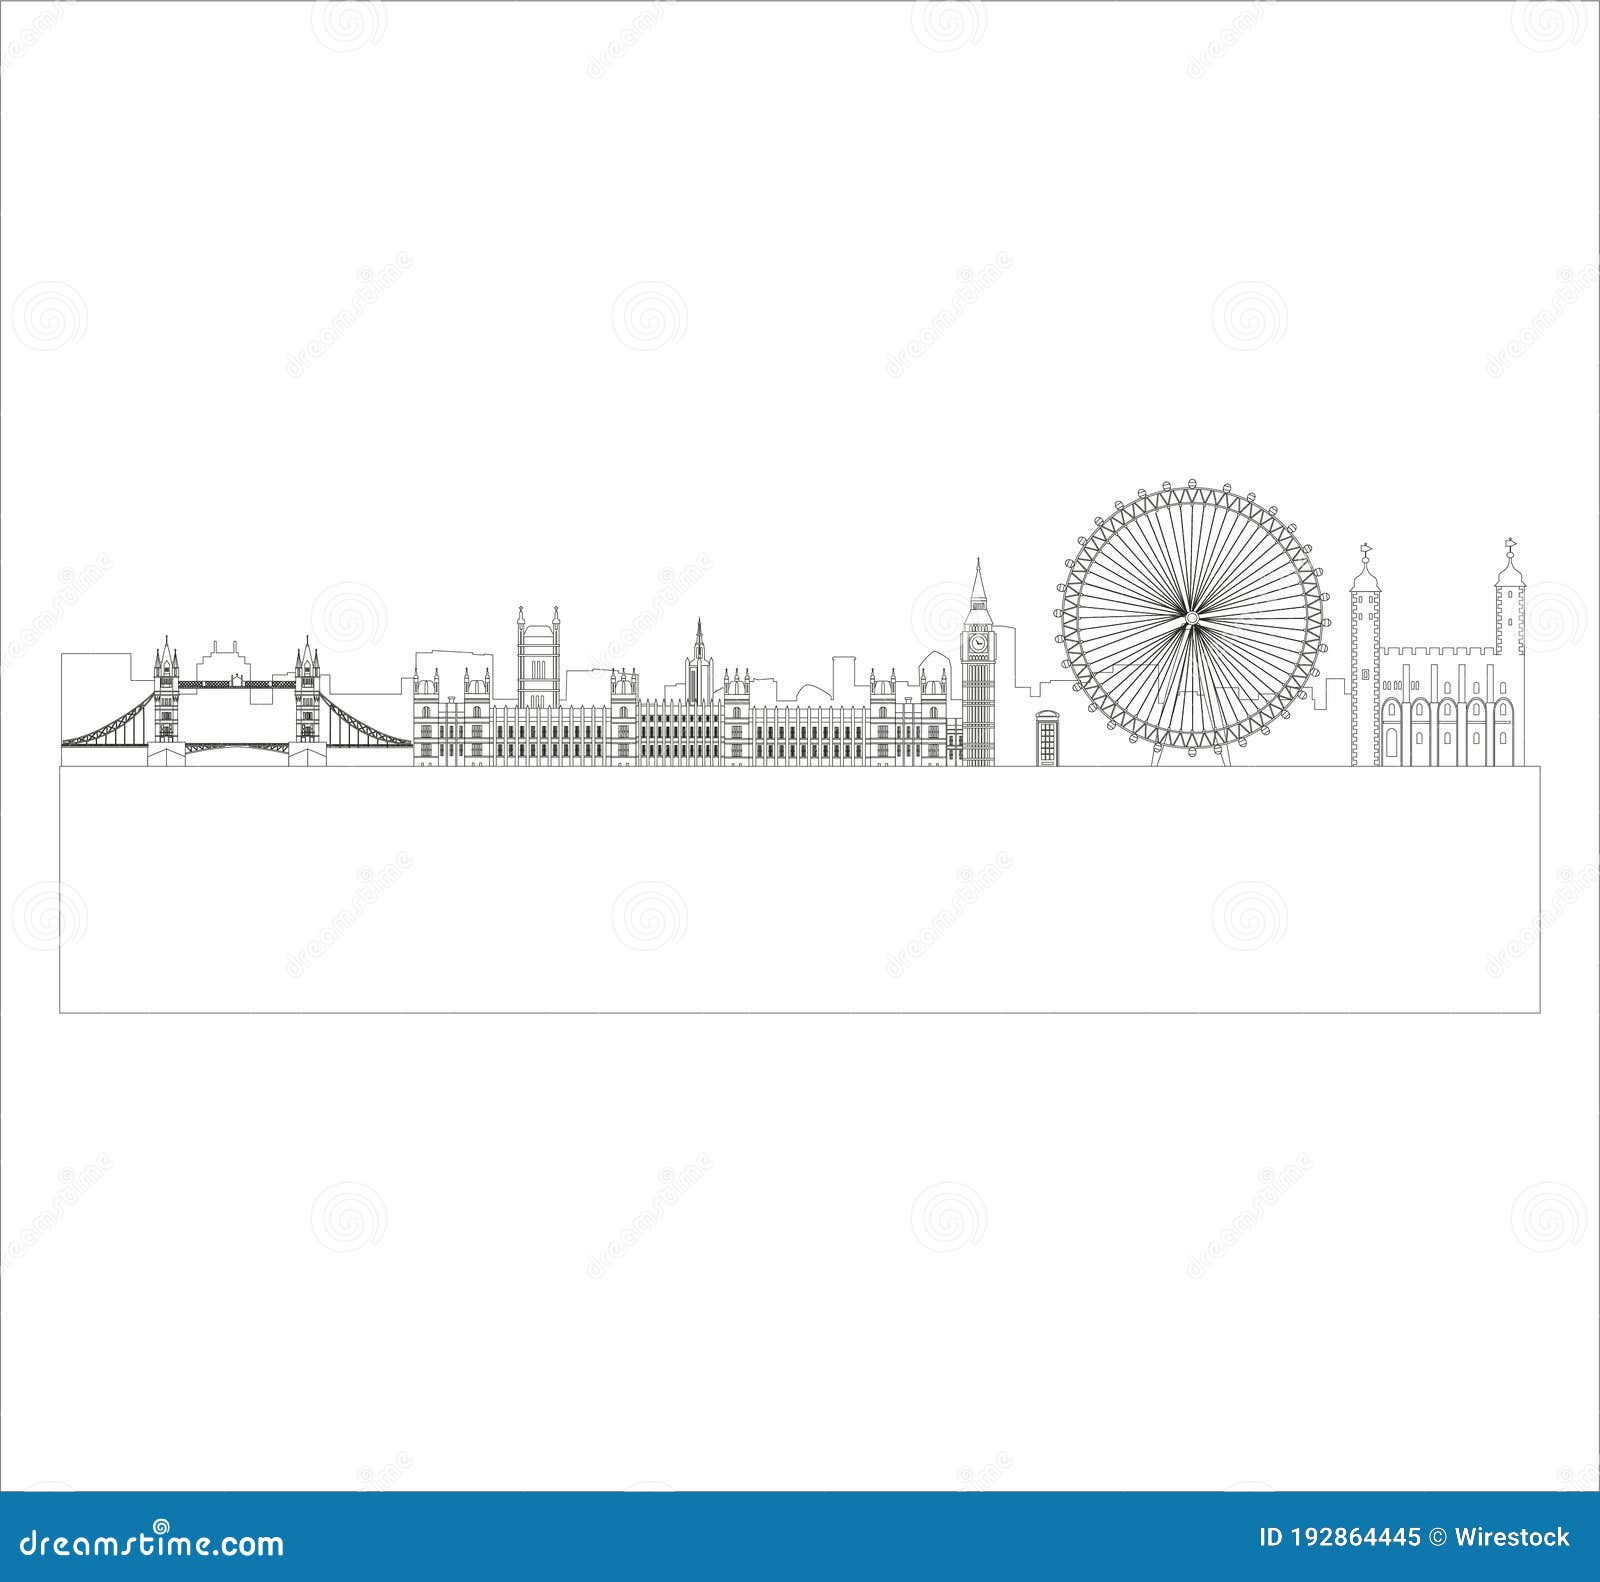 Illustration of the London Eye, Big Ben and Other Famous Buildings in ...